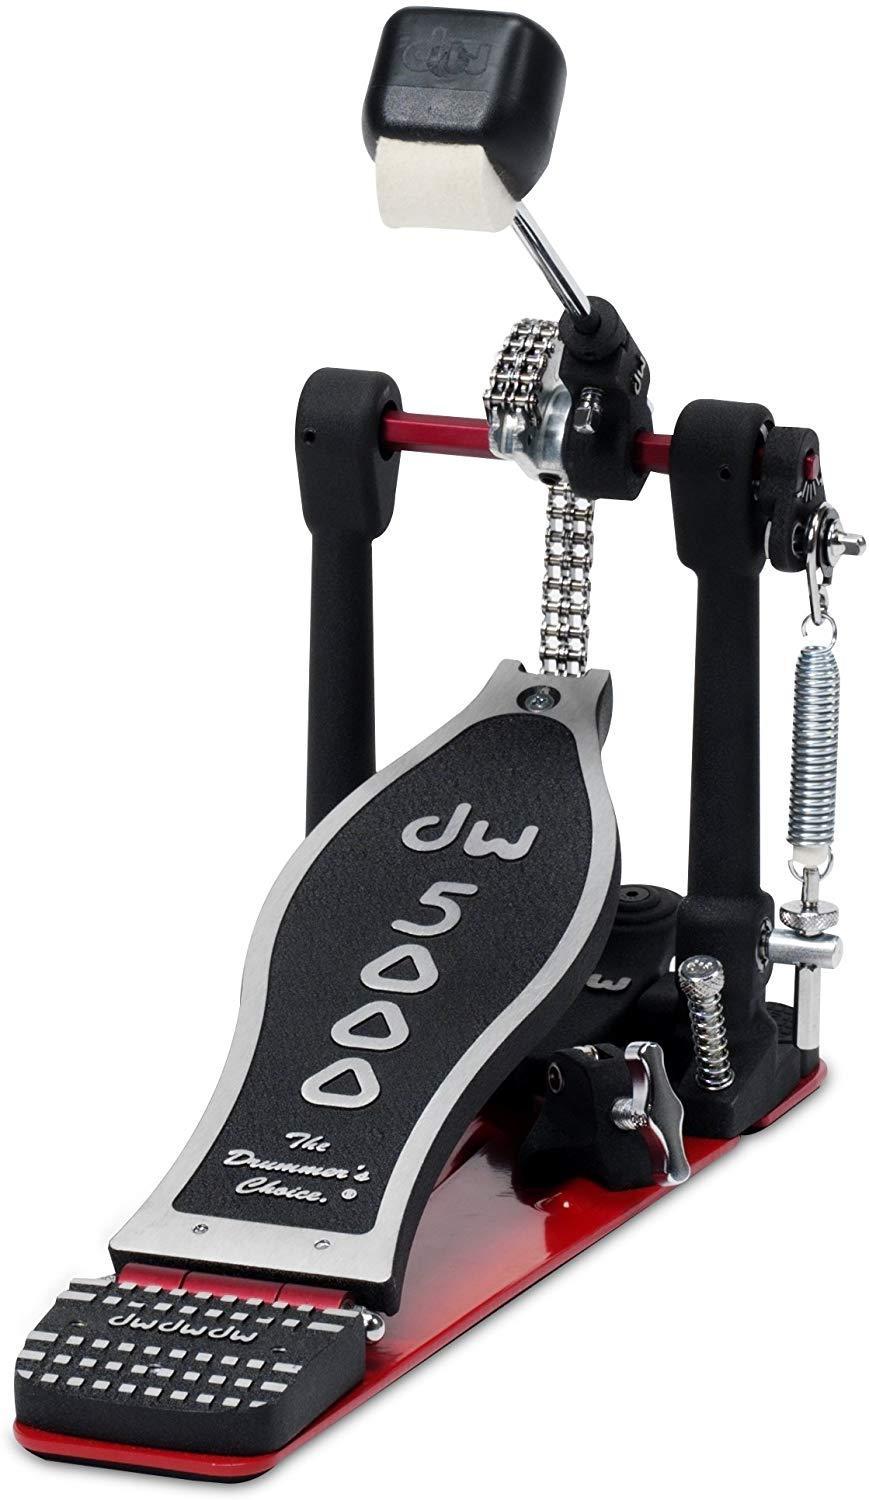 DW 5000 Turbo Single Bass Pedal - Best Single Bass Pedals